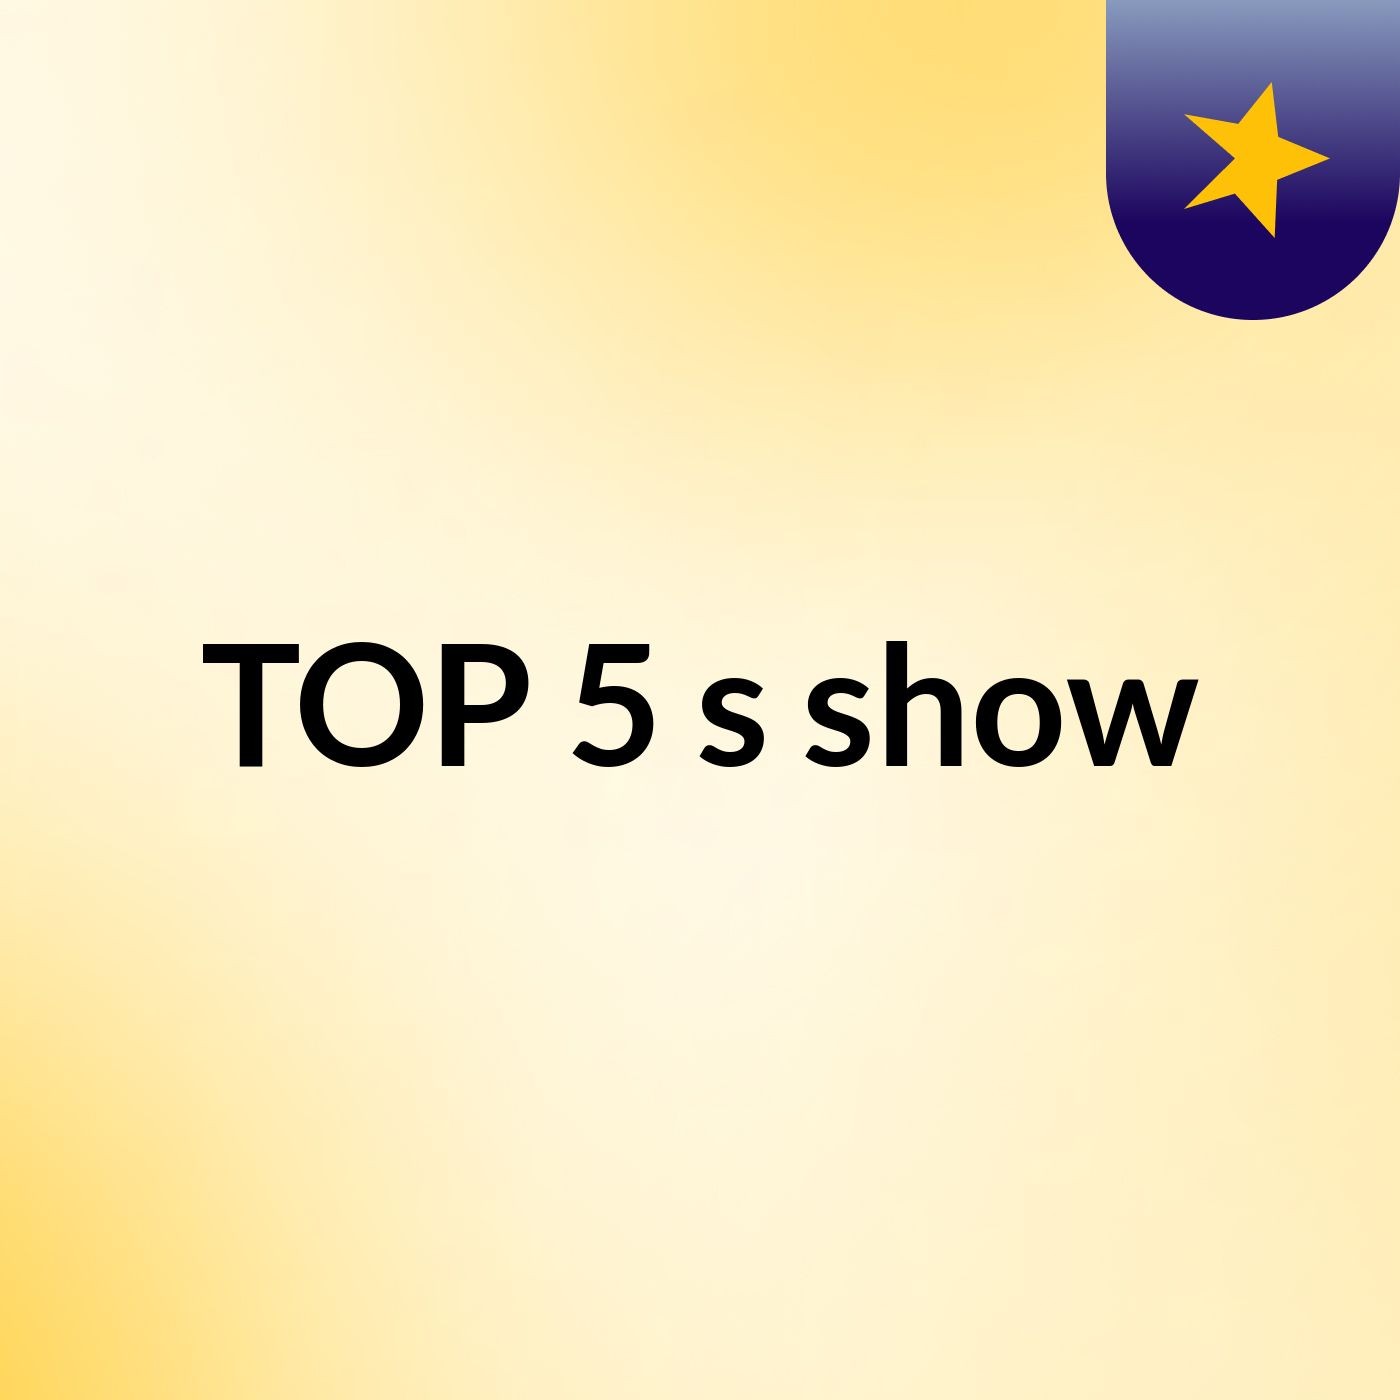 TOP 5's show